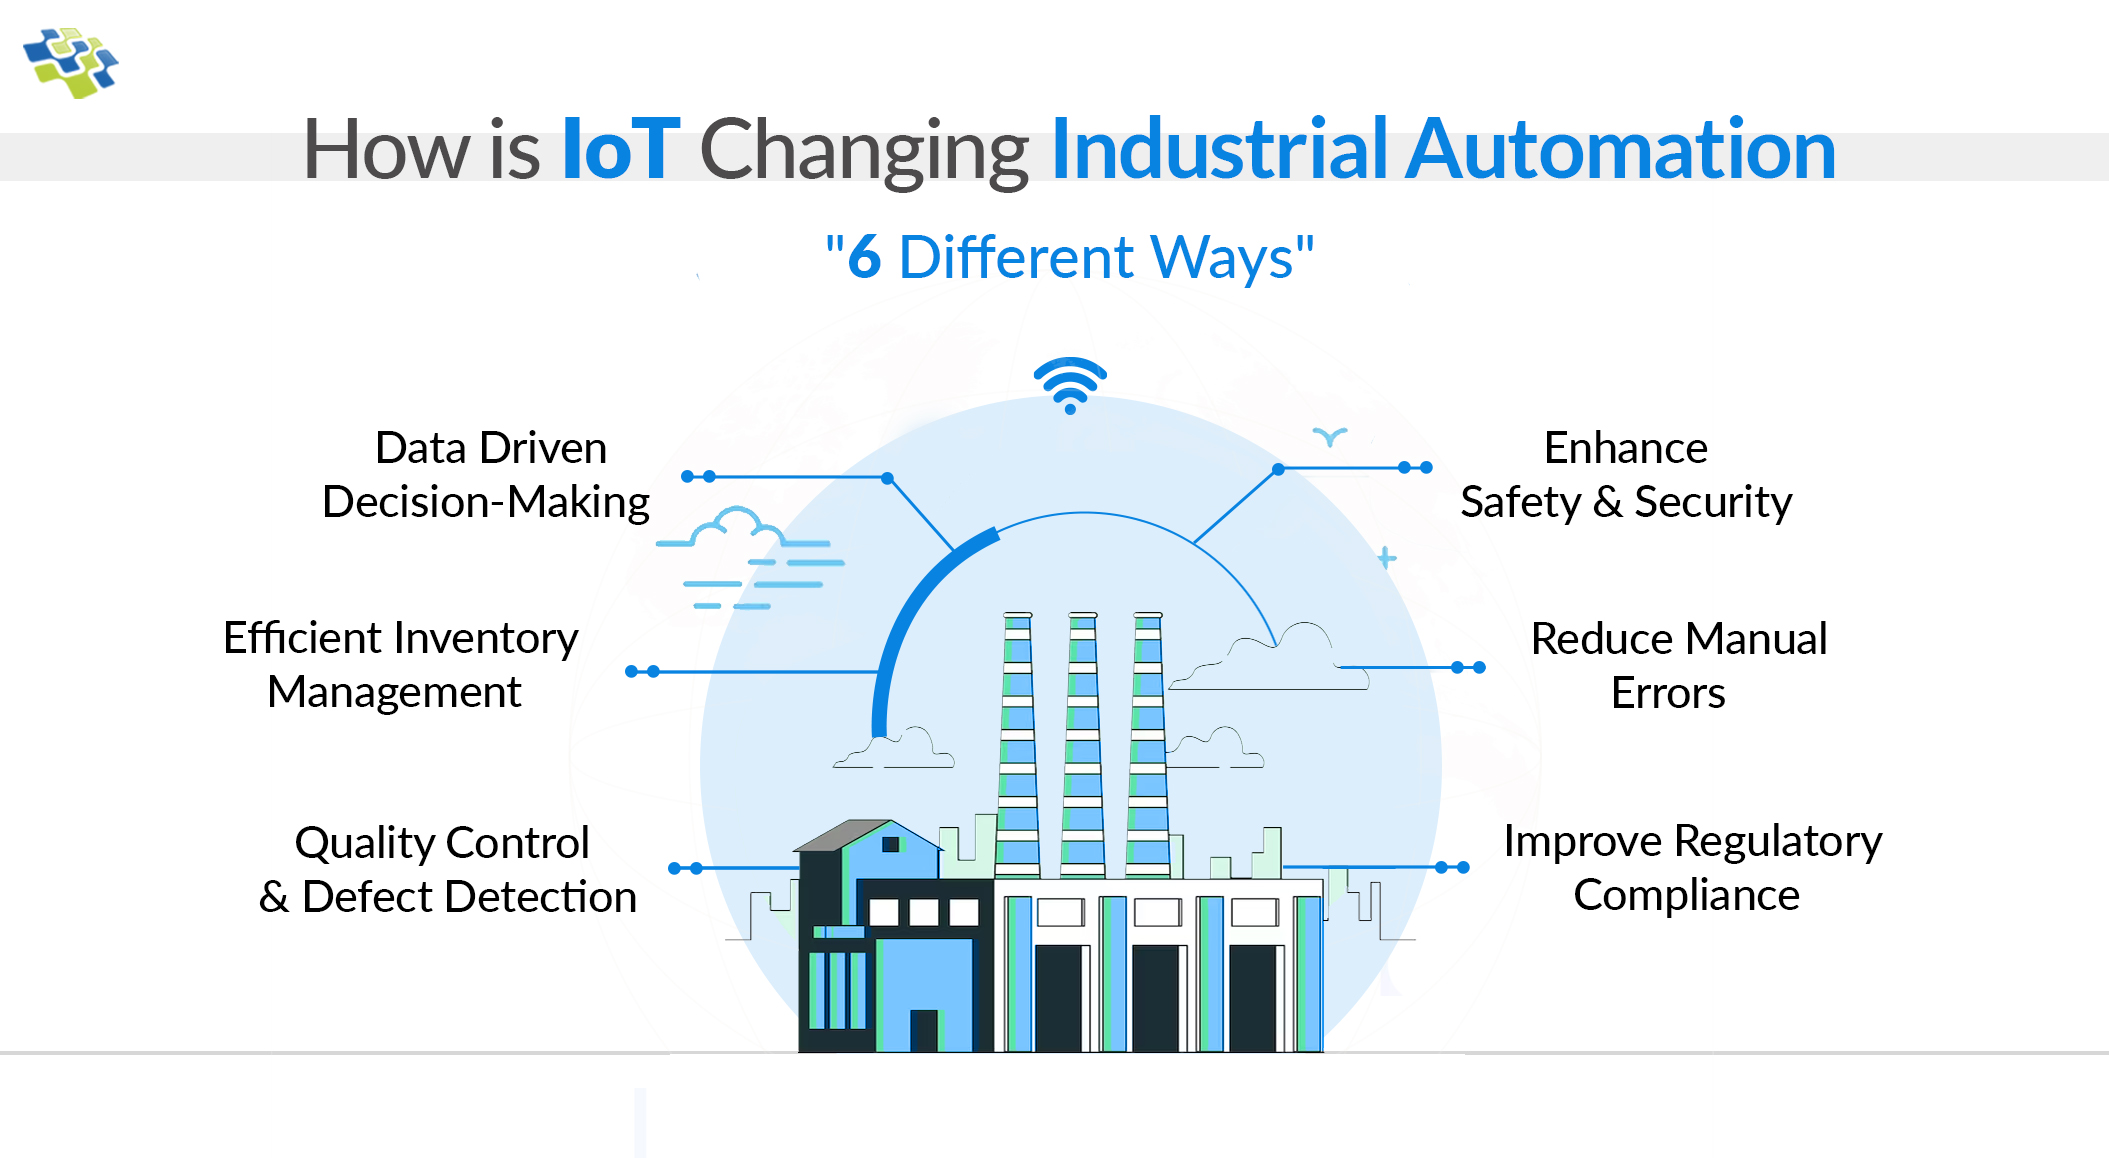 IoT is changing Industrial Automation